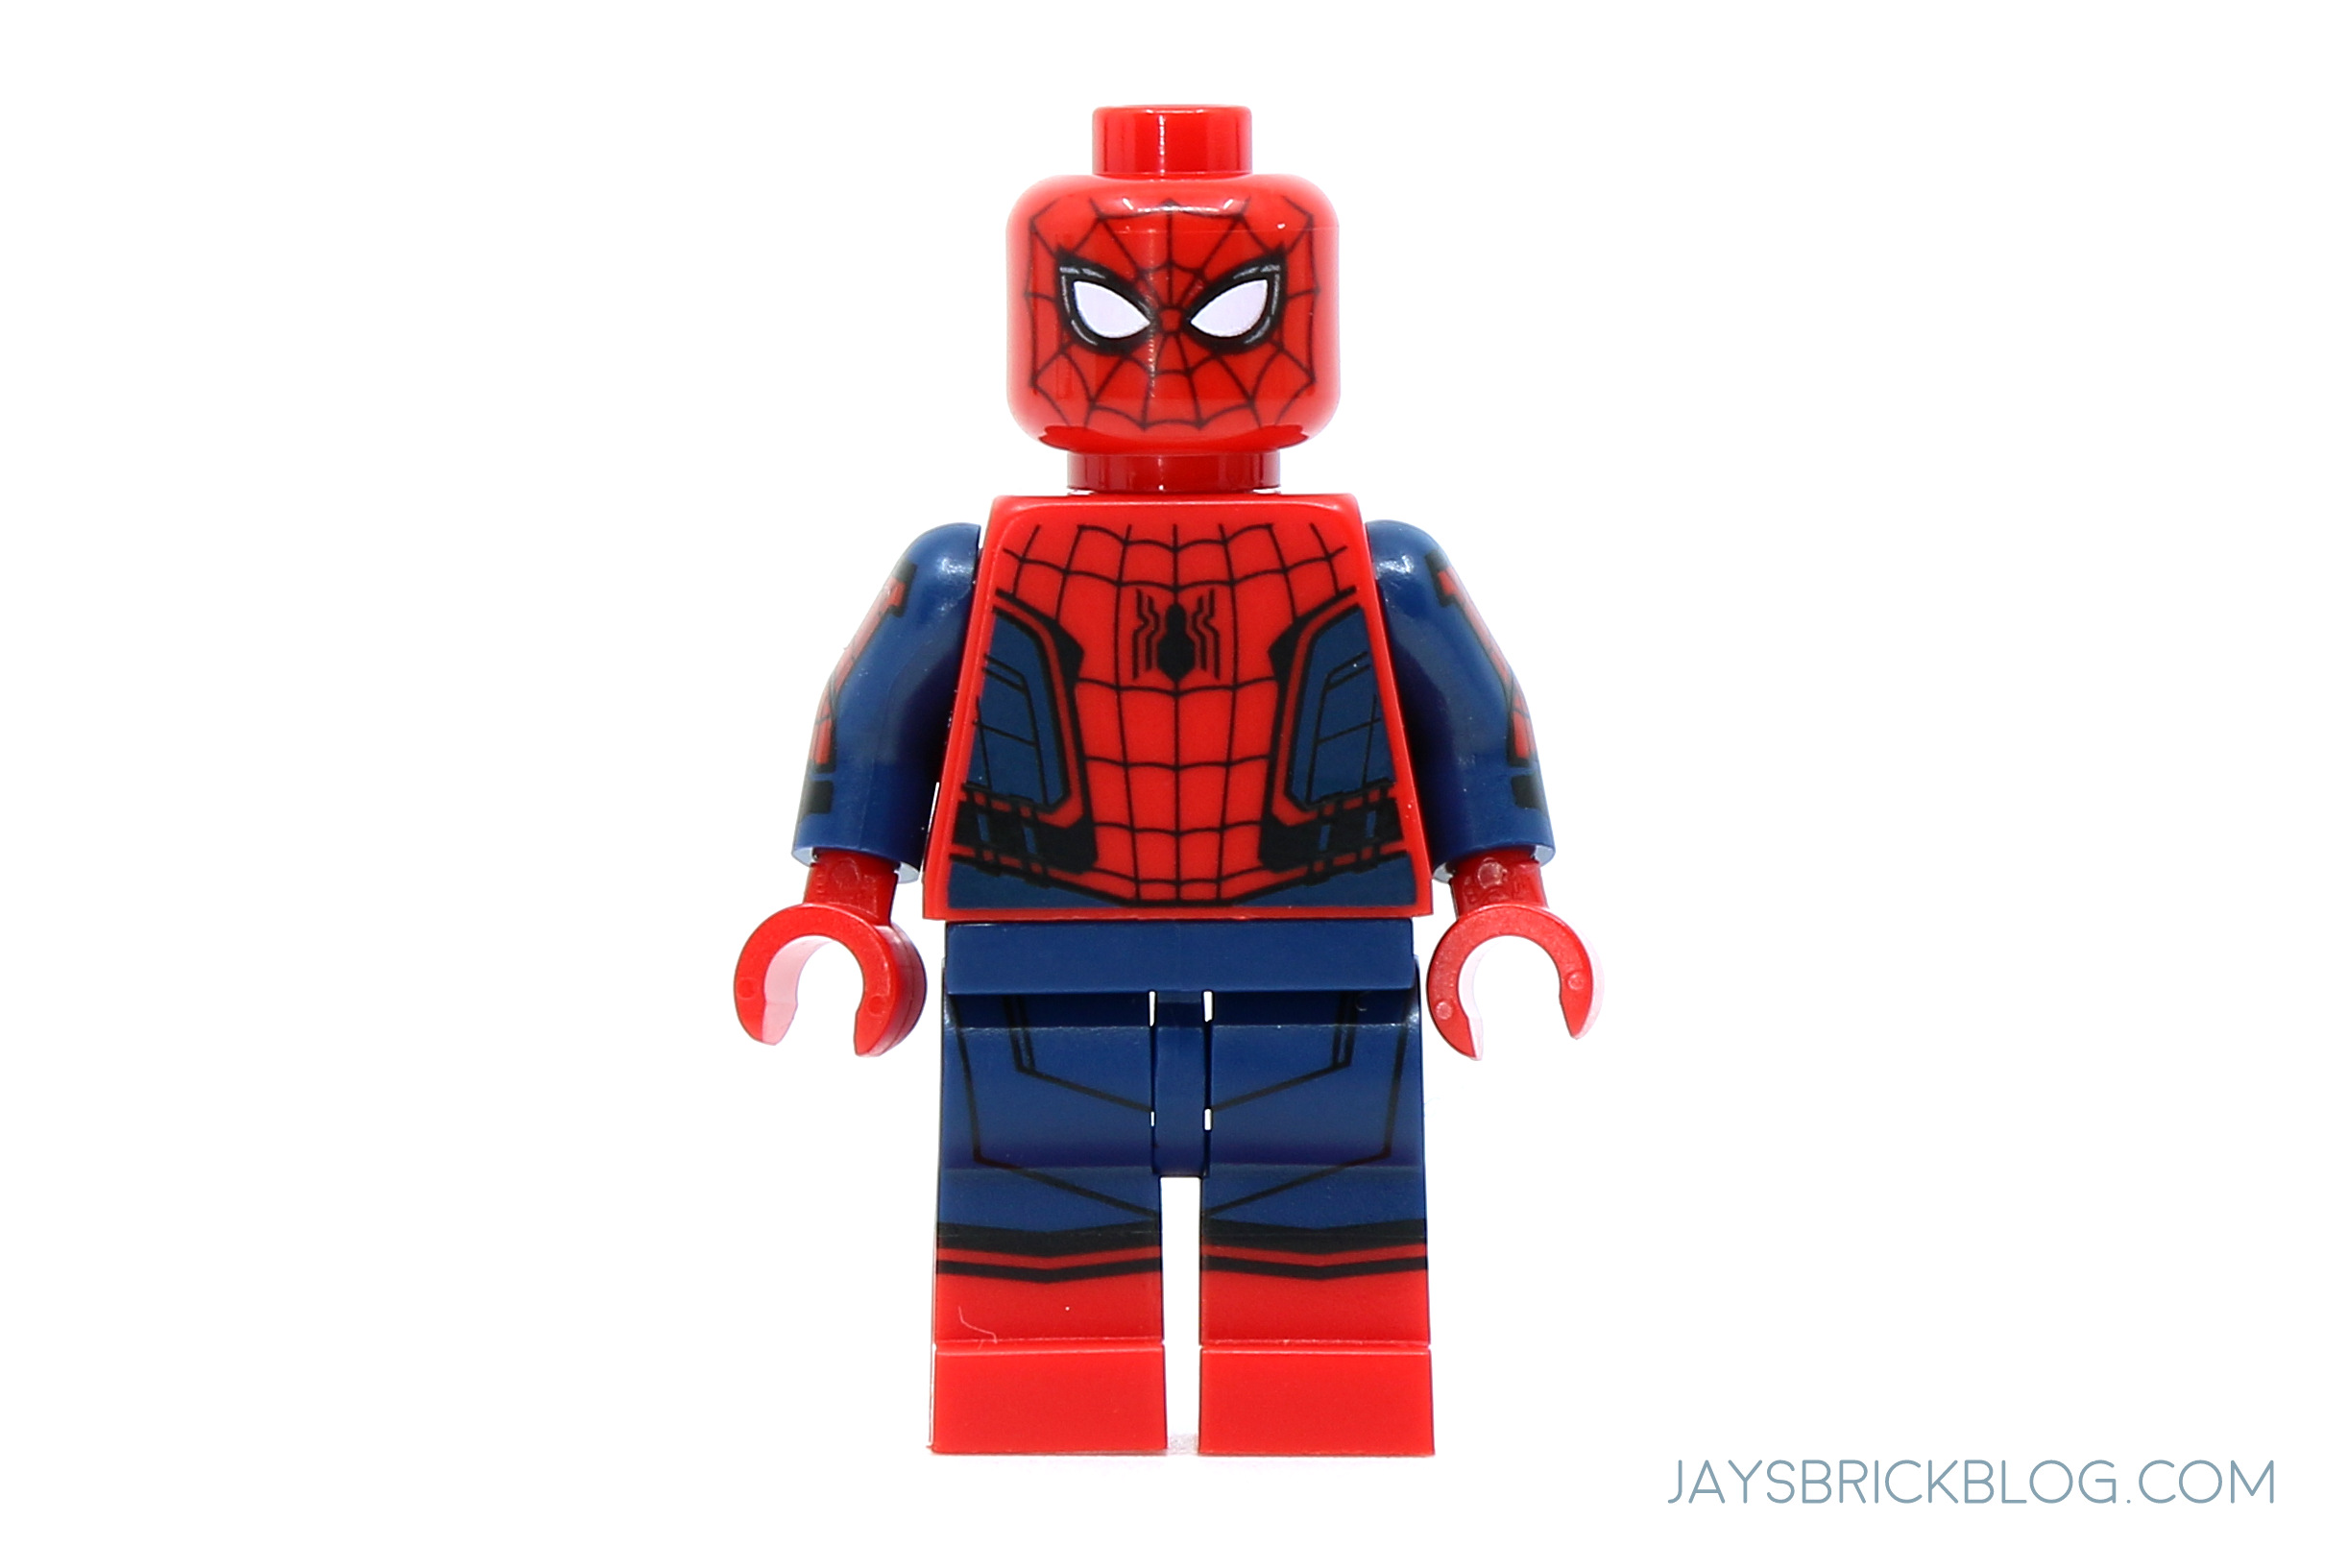 lego far from home spiderman